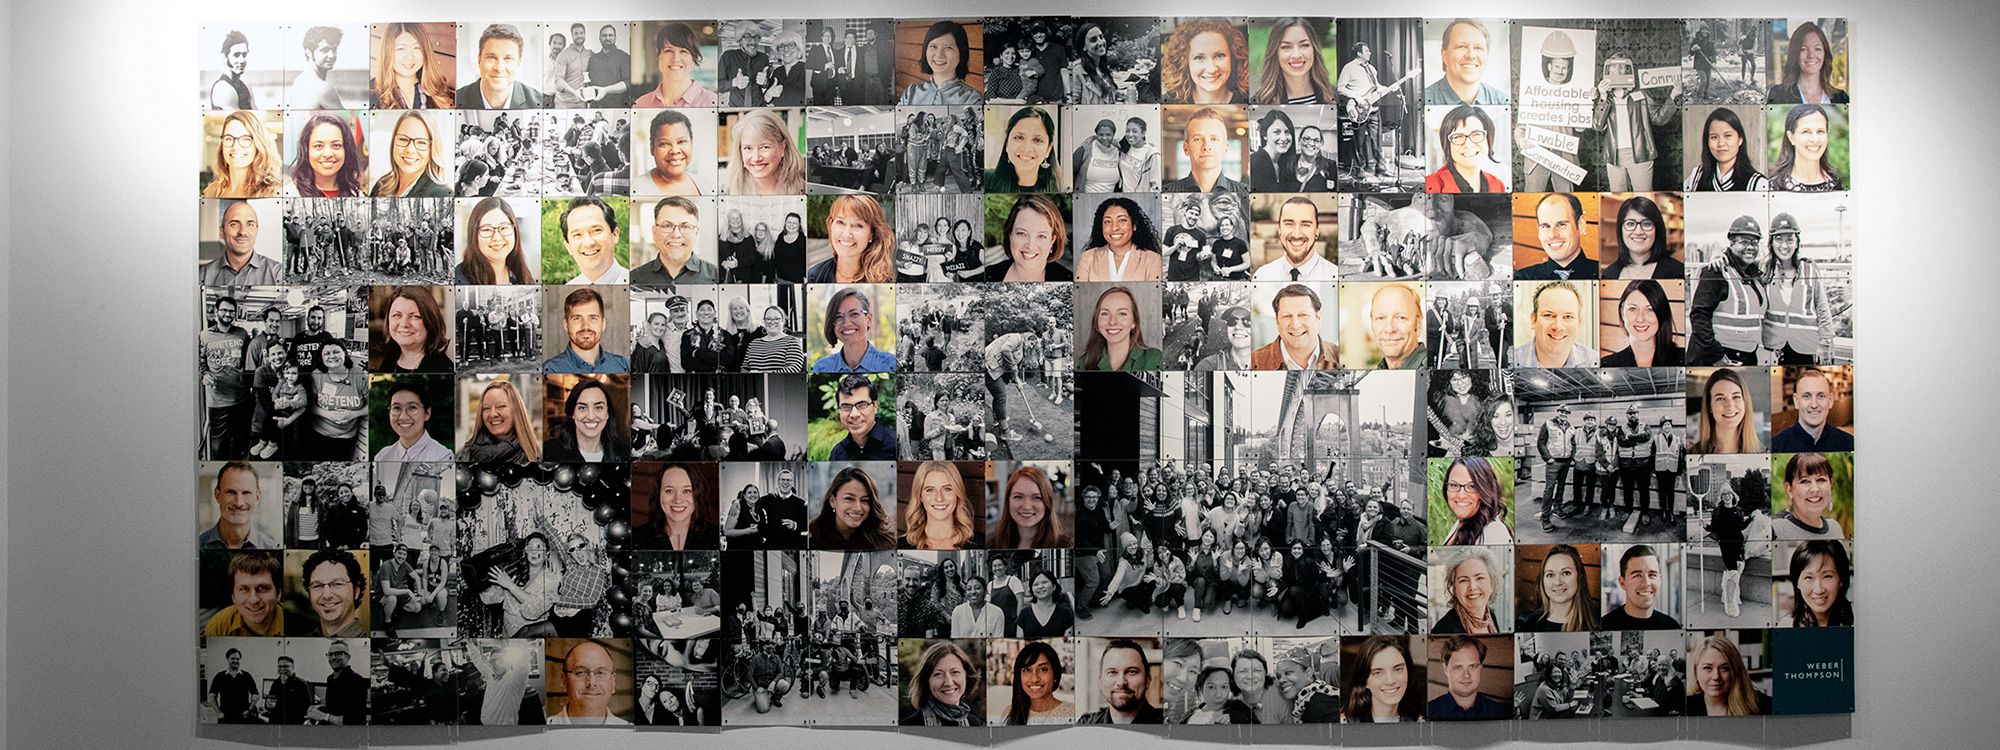 Photo of Weber Thompson employees on the wall in the office